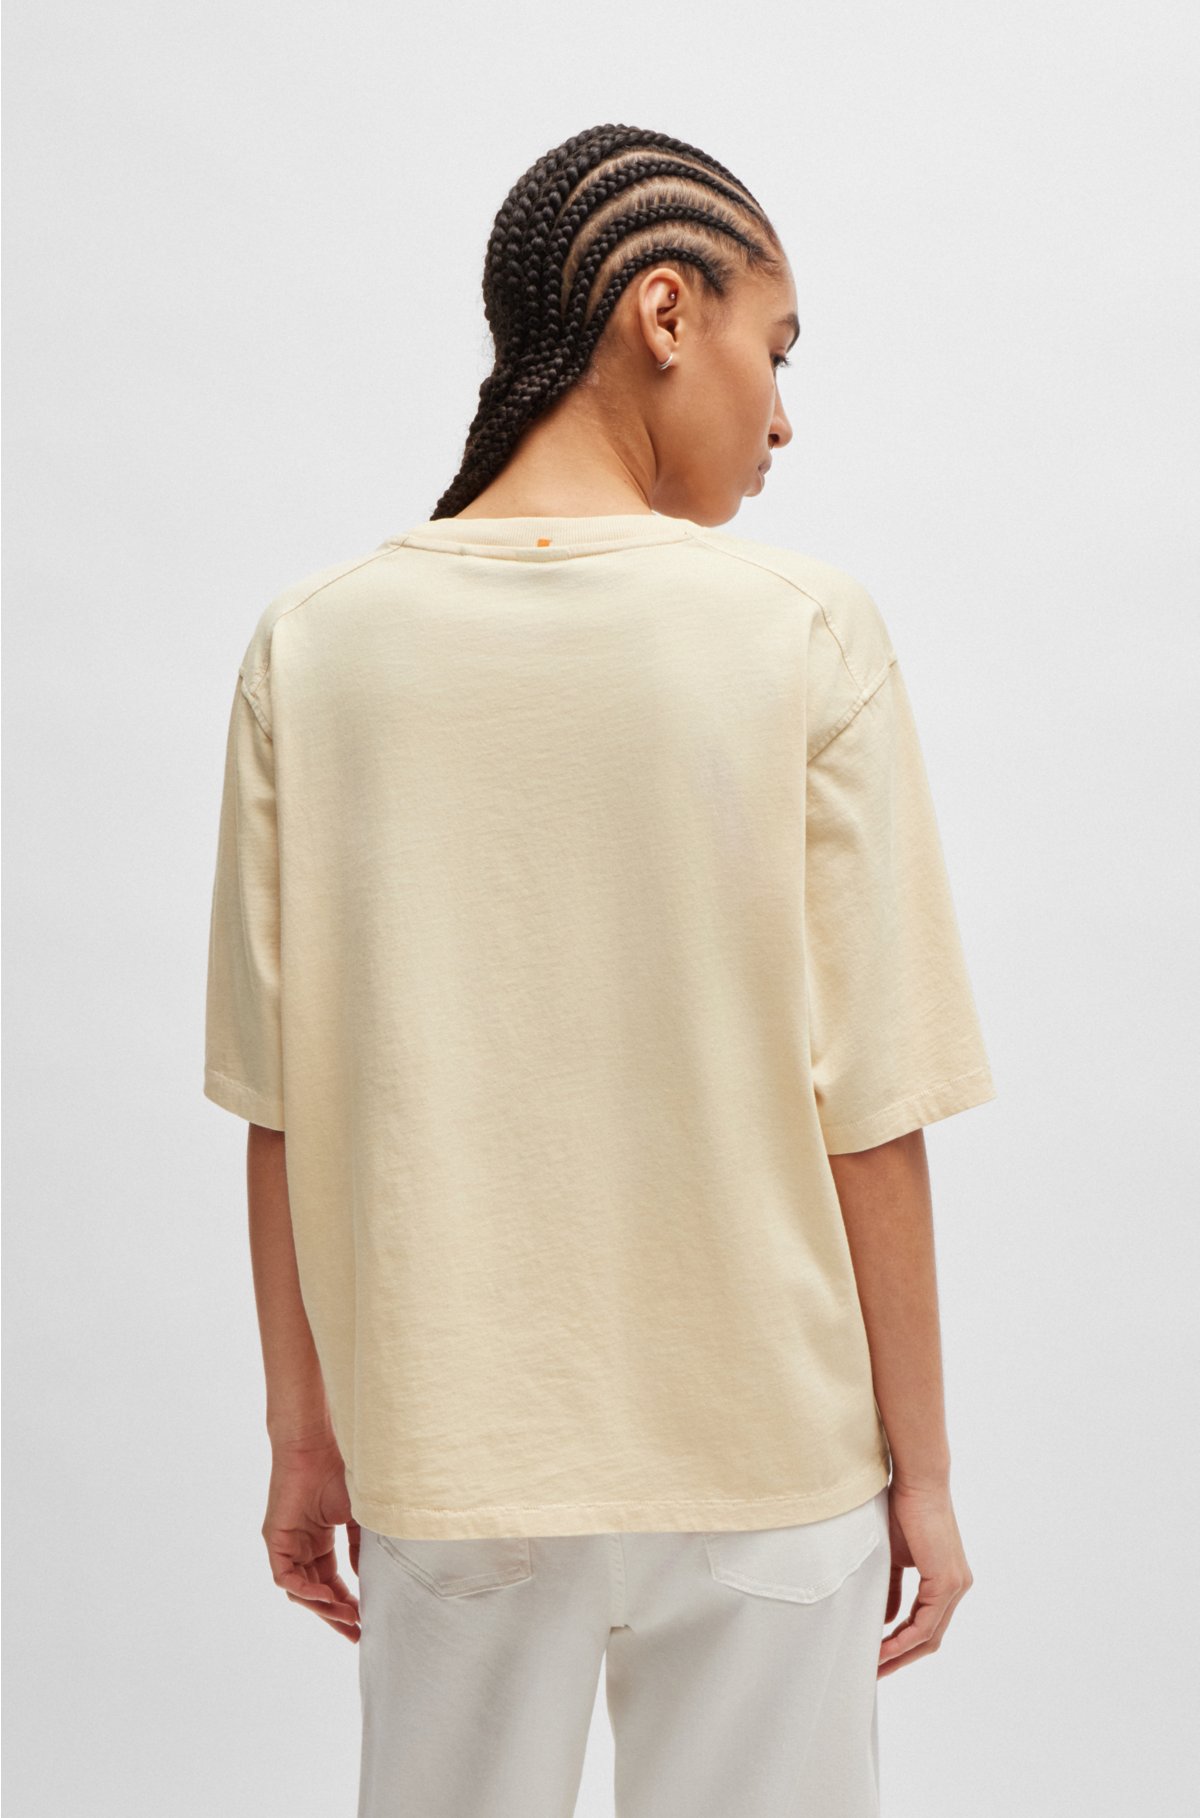 Cotton T-shirt with embroidered logo, Light Beige